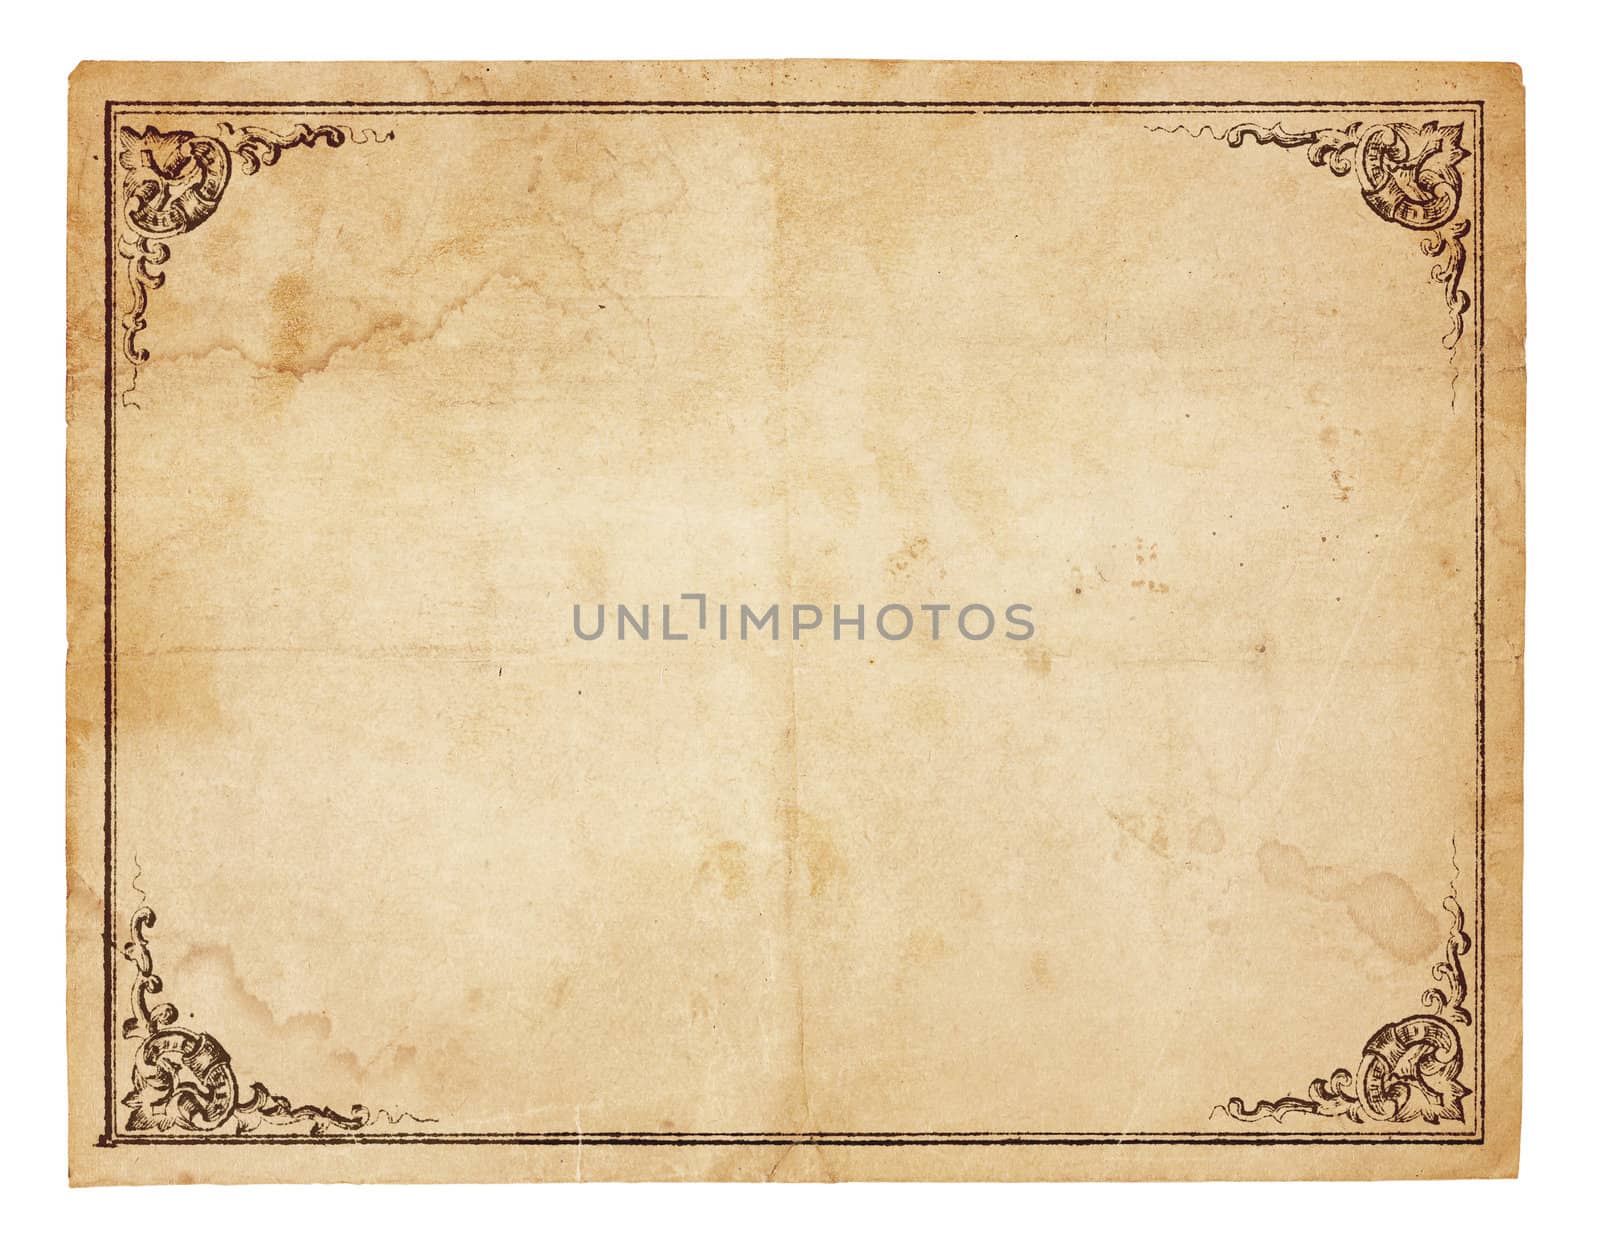 Aged, yellowing paper with creases, stains and smudges. Blank except for printed border with ornate corners. Isolated on white. Includes clipping path.